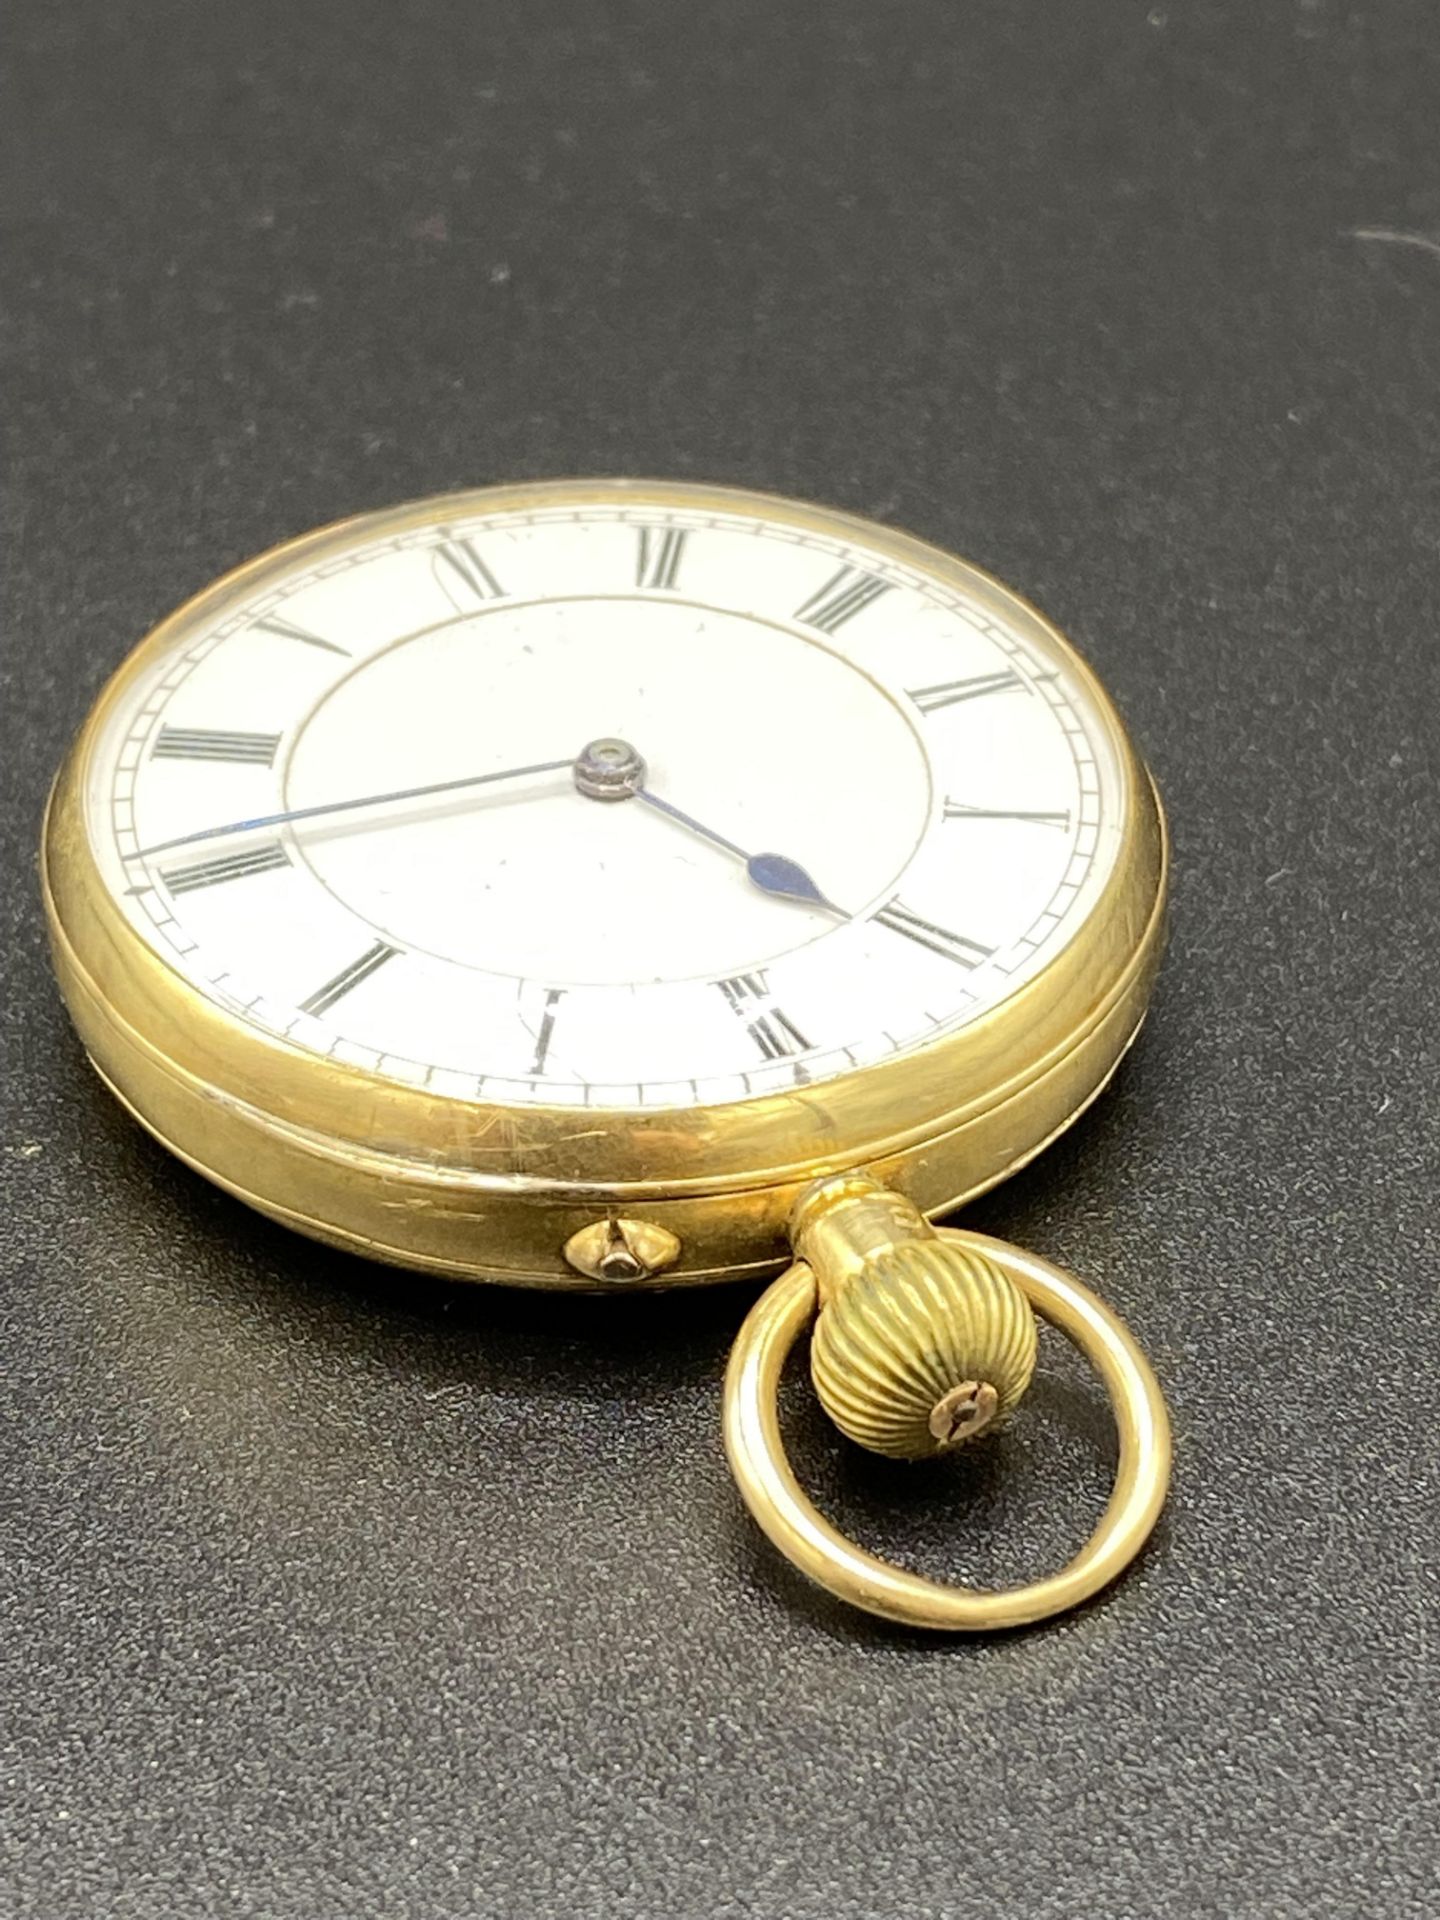 Gold coloured metal pocket watch - Image 4 of 5